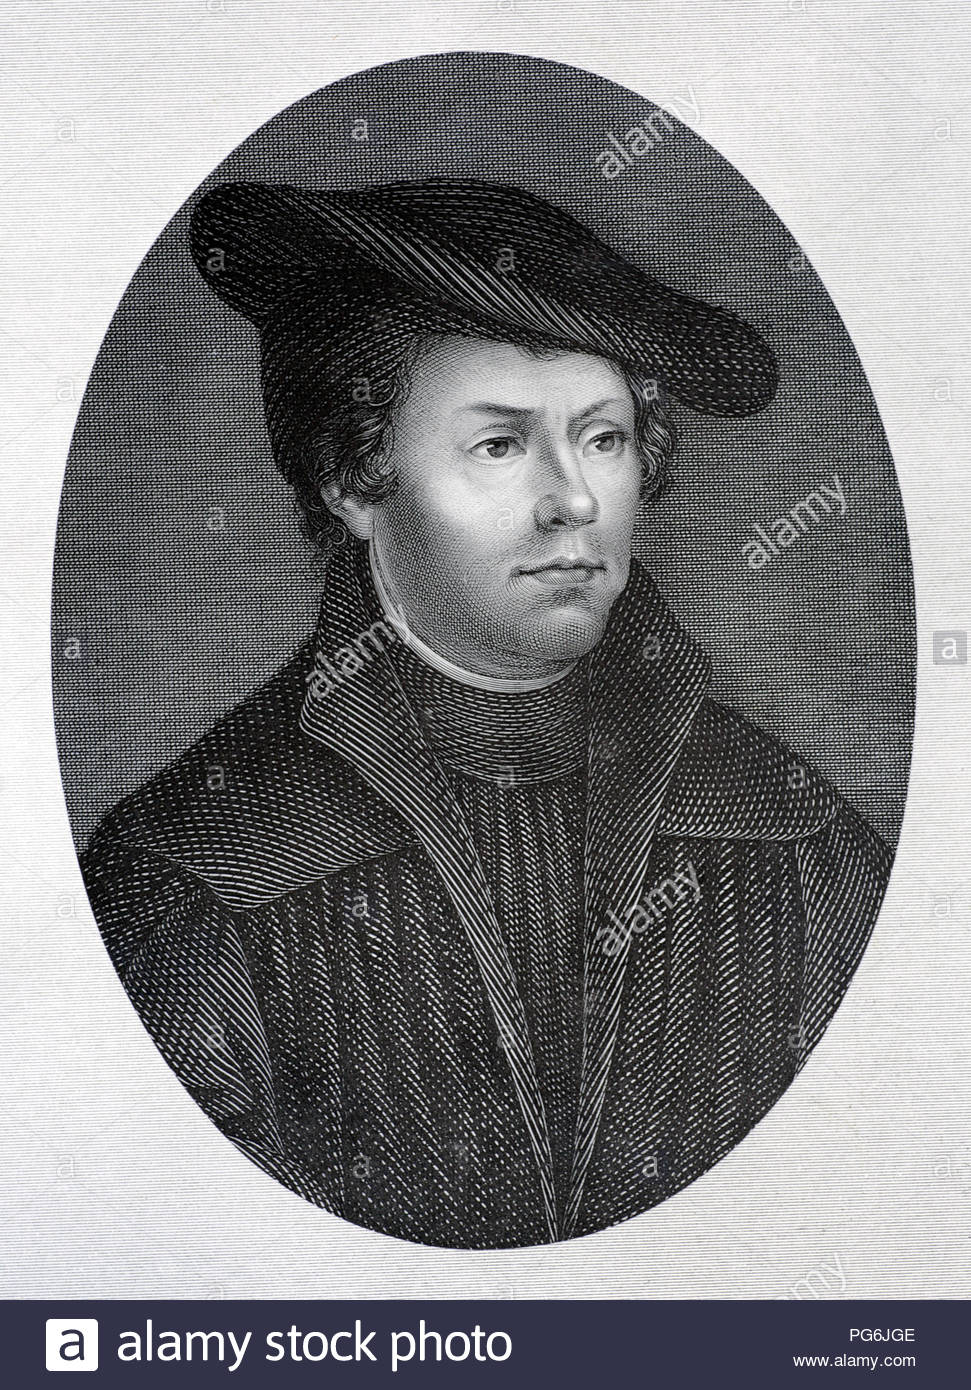 Martin Luther portrait, 1483 – 1546 was a German professor of theology, composer, priest, monk, and a seminal figure in the Protestant Reformation, antique illustration from 1880 Stock Photo